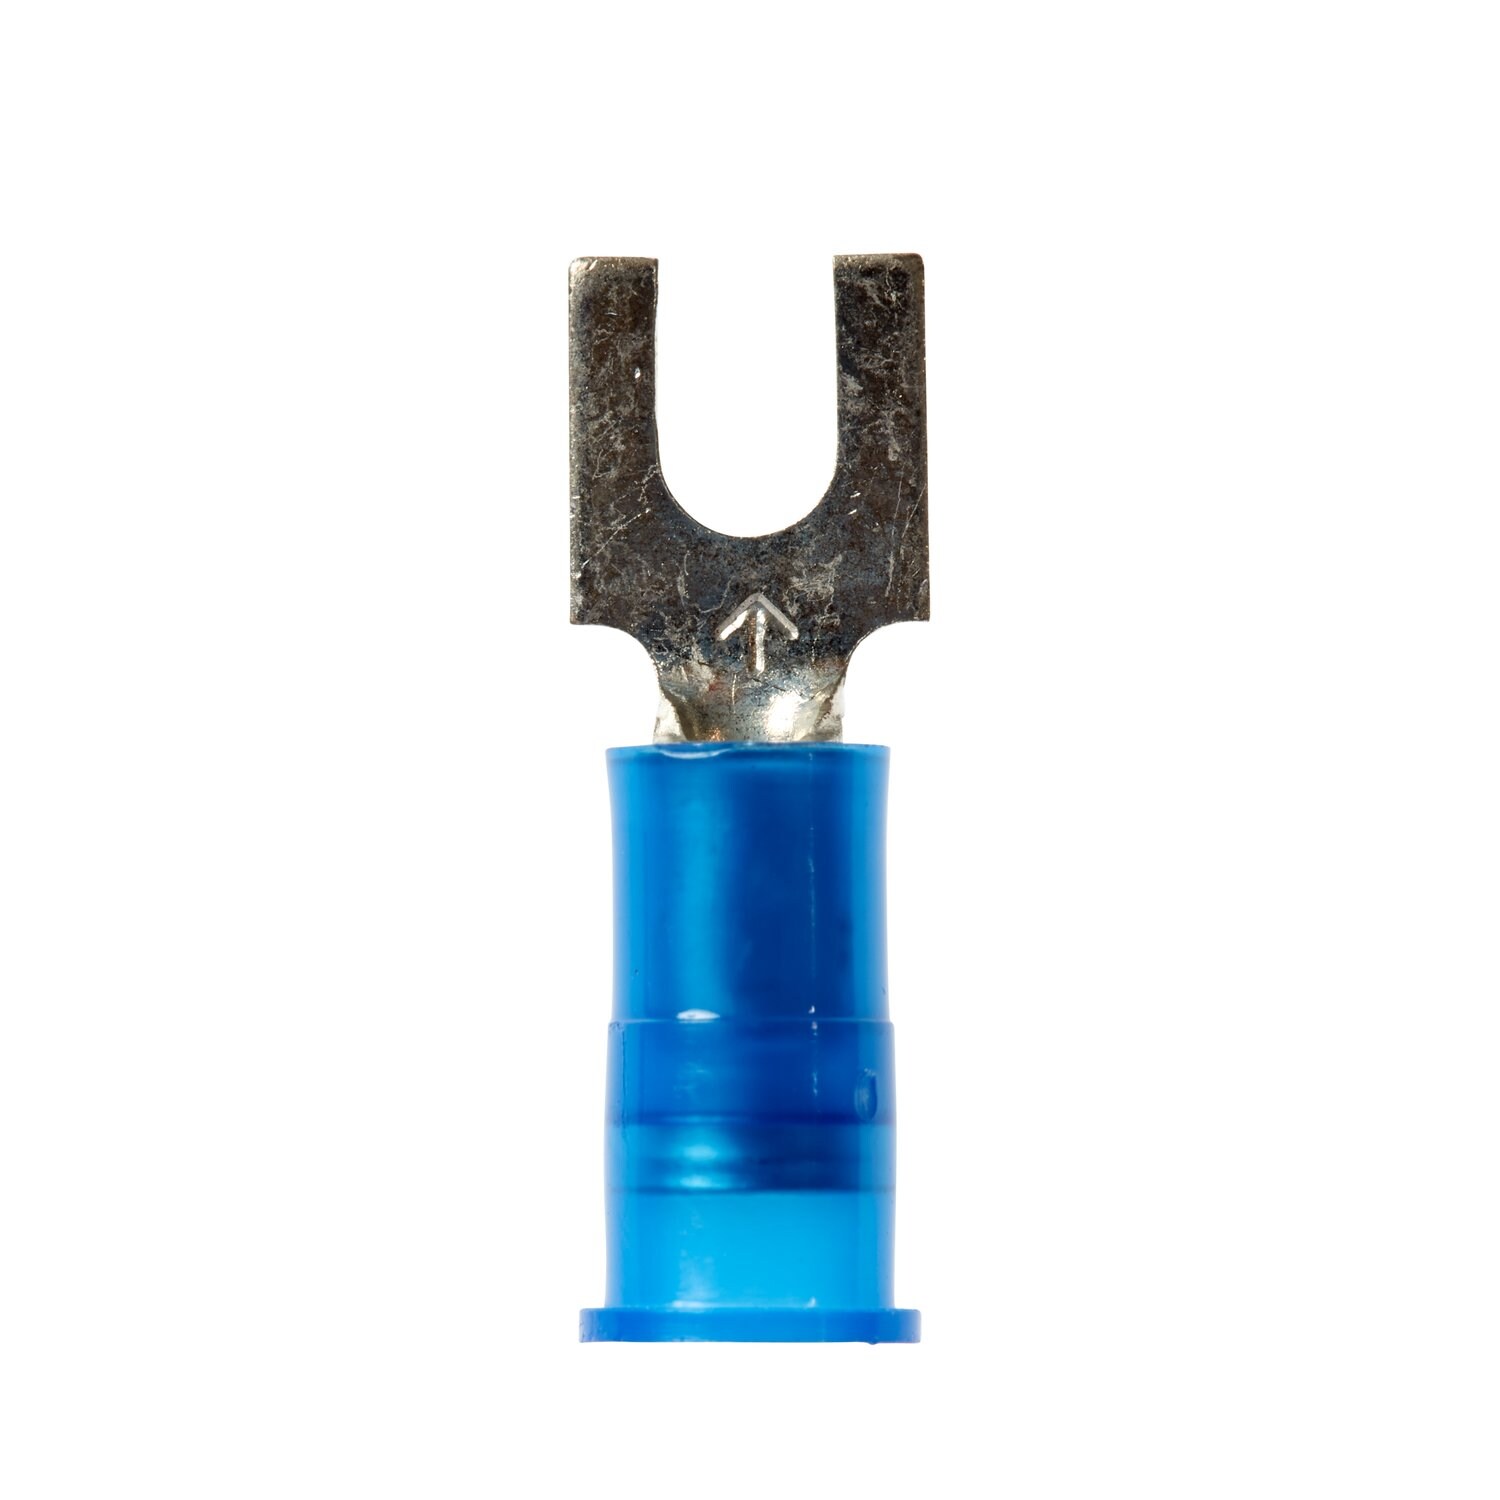 7100165310 - 3M Scotchlok Block Fork Nylon Insulated, 100/bottle, MNG14-6FB/SX,
suitable for use in a terminal block, 500/Case